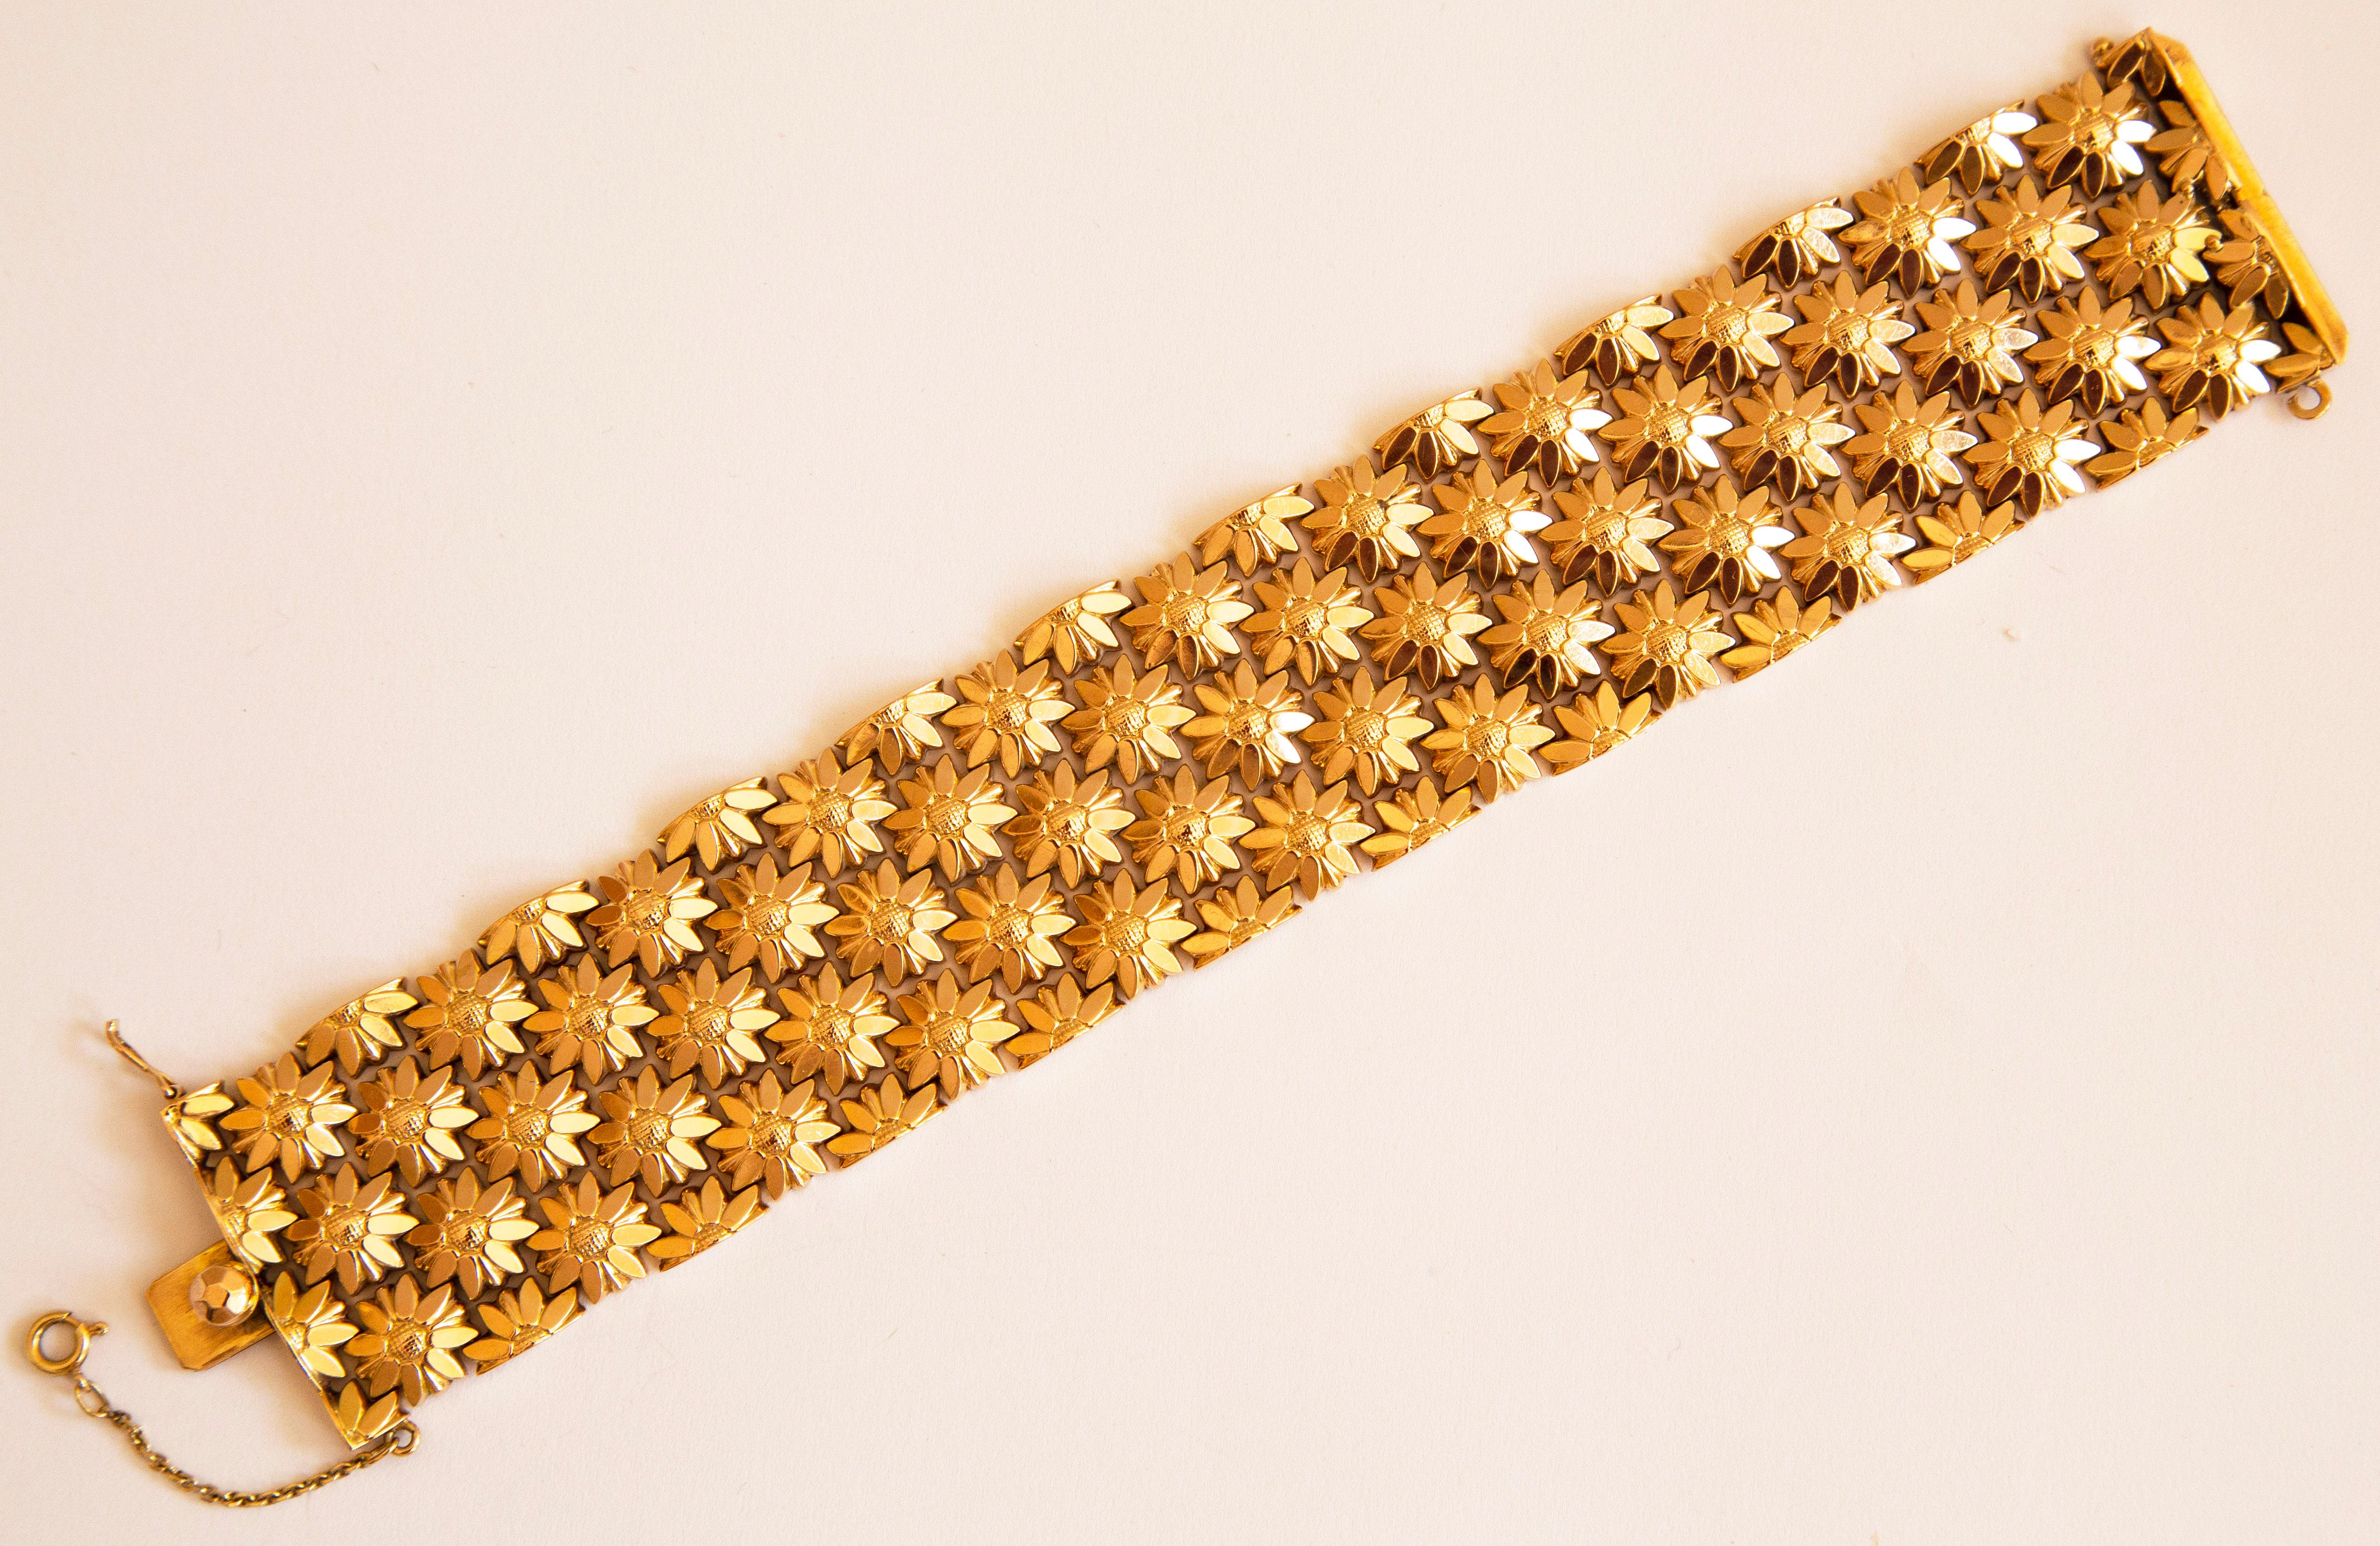 A vintage Italian wide link bracelet manufactured in the late 1970s. The bracelet is made of 18 karat yellow gold and it features  floral (sunflowers like) motifs. The bracelet can be closed with a box lock and in addition it has a safety lock clasp